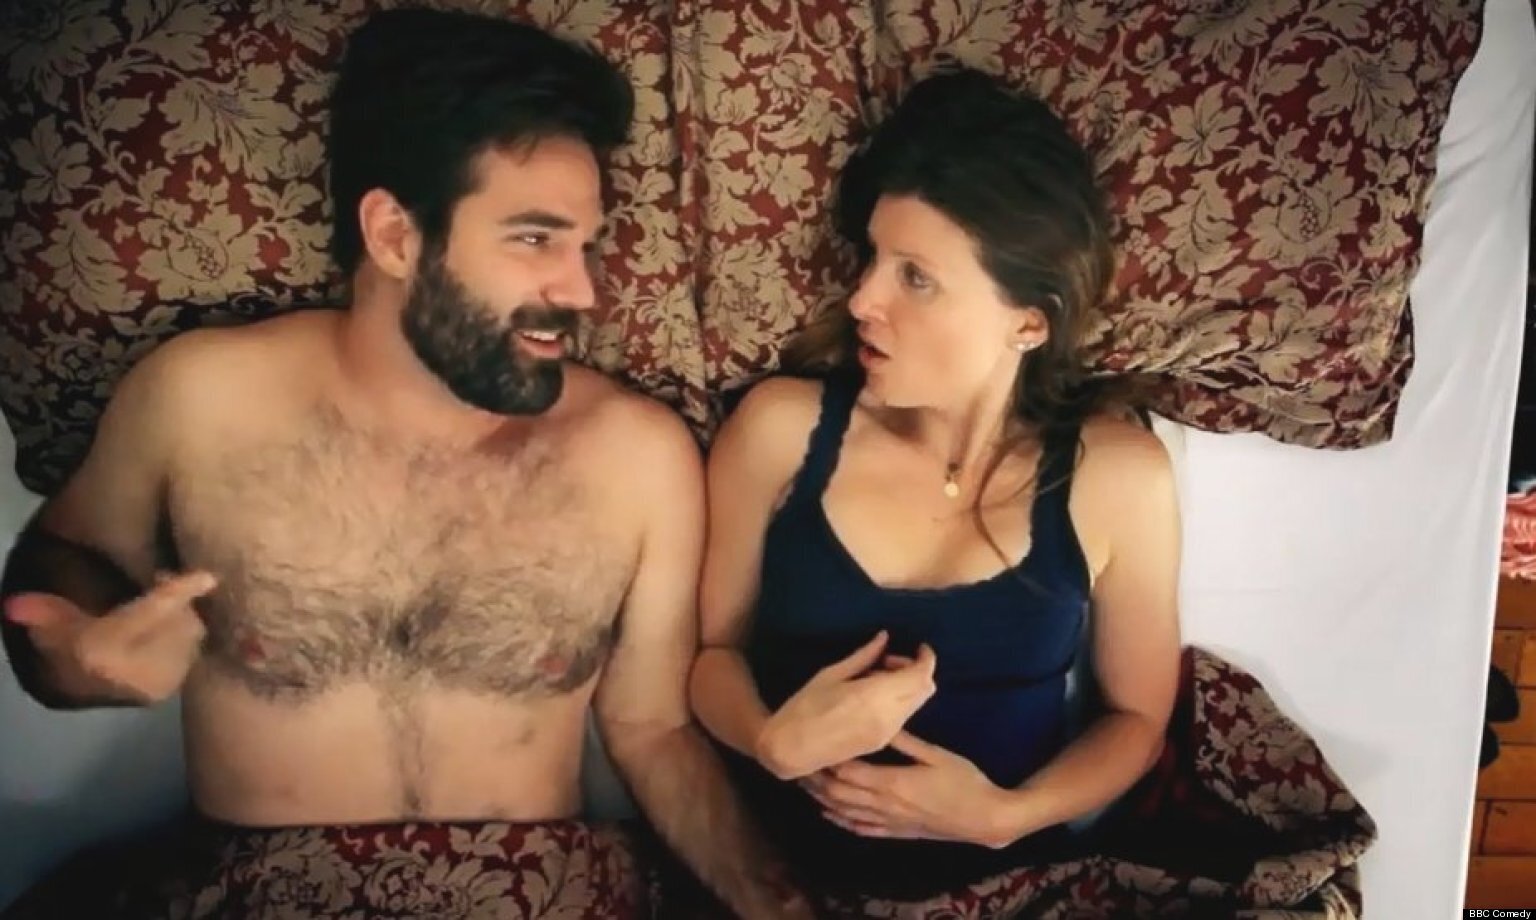 Rob Delaney And Sharon Horgans Kinky Sex Sketch (VIDEO) HuffPost UK Comedy pic photo